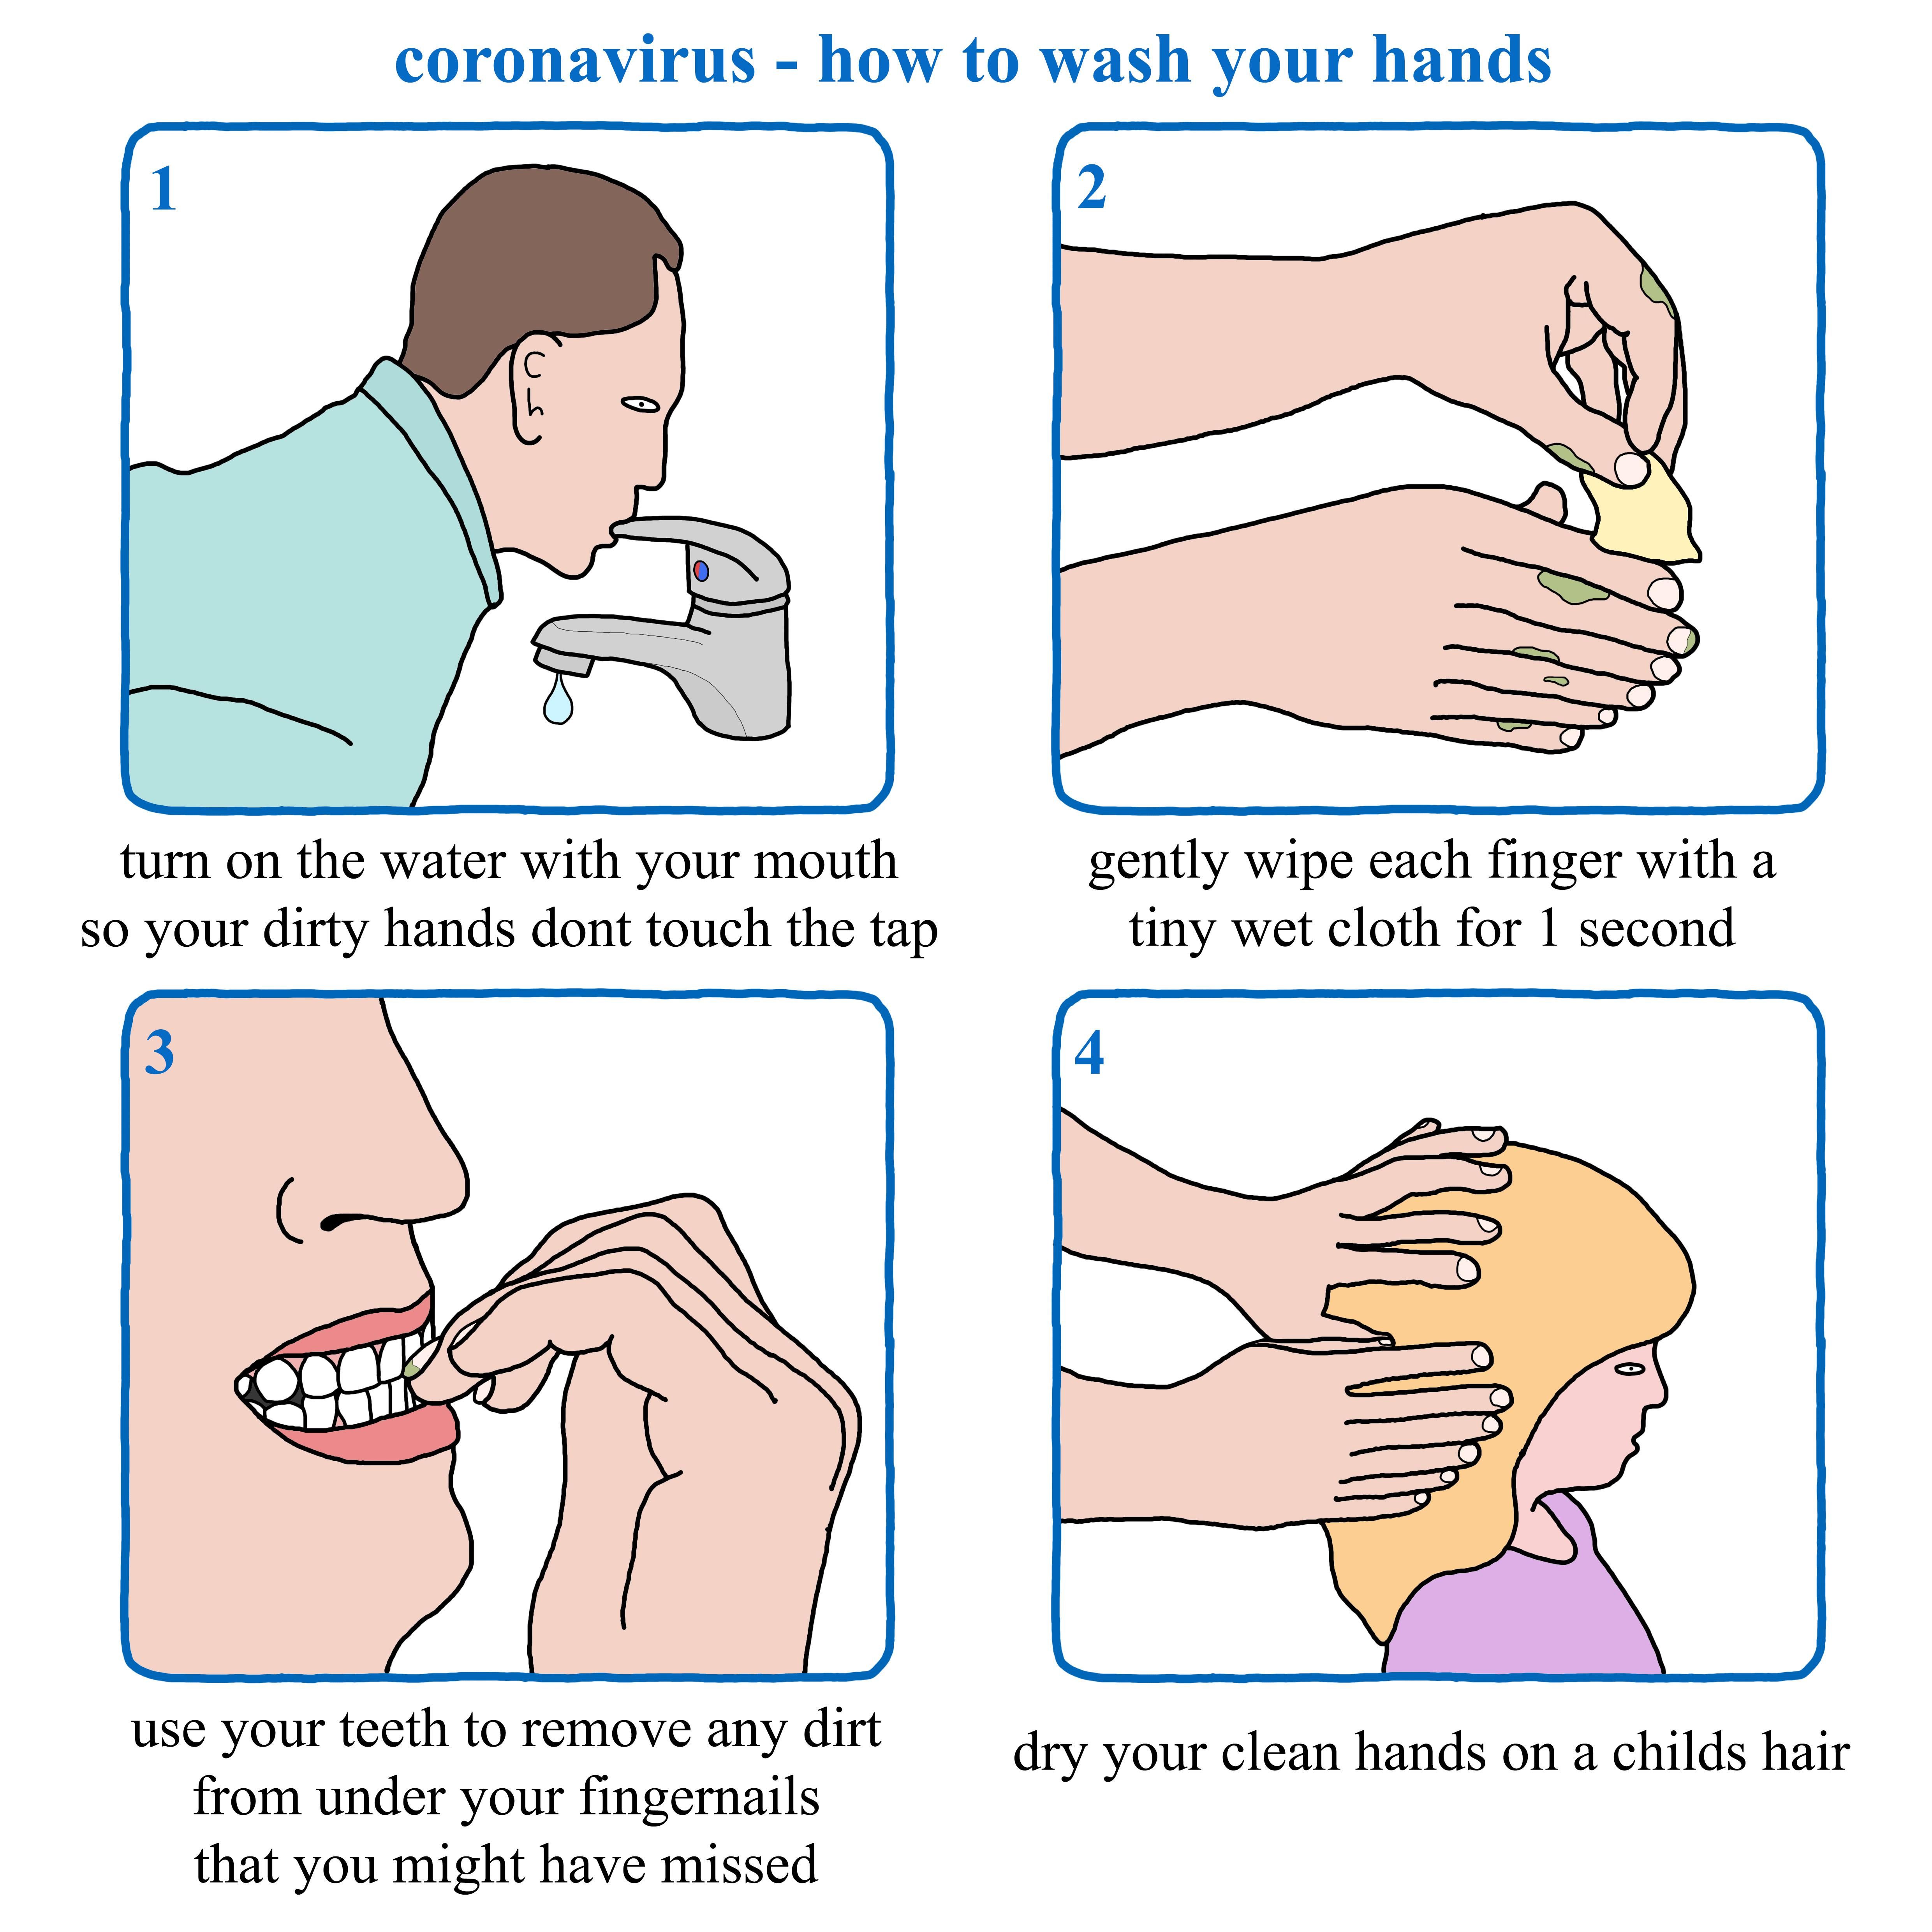 Remember to wash your hands folks!